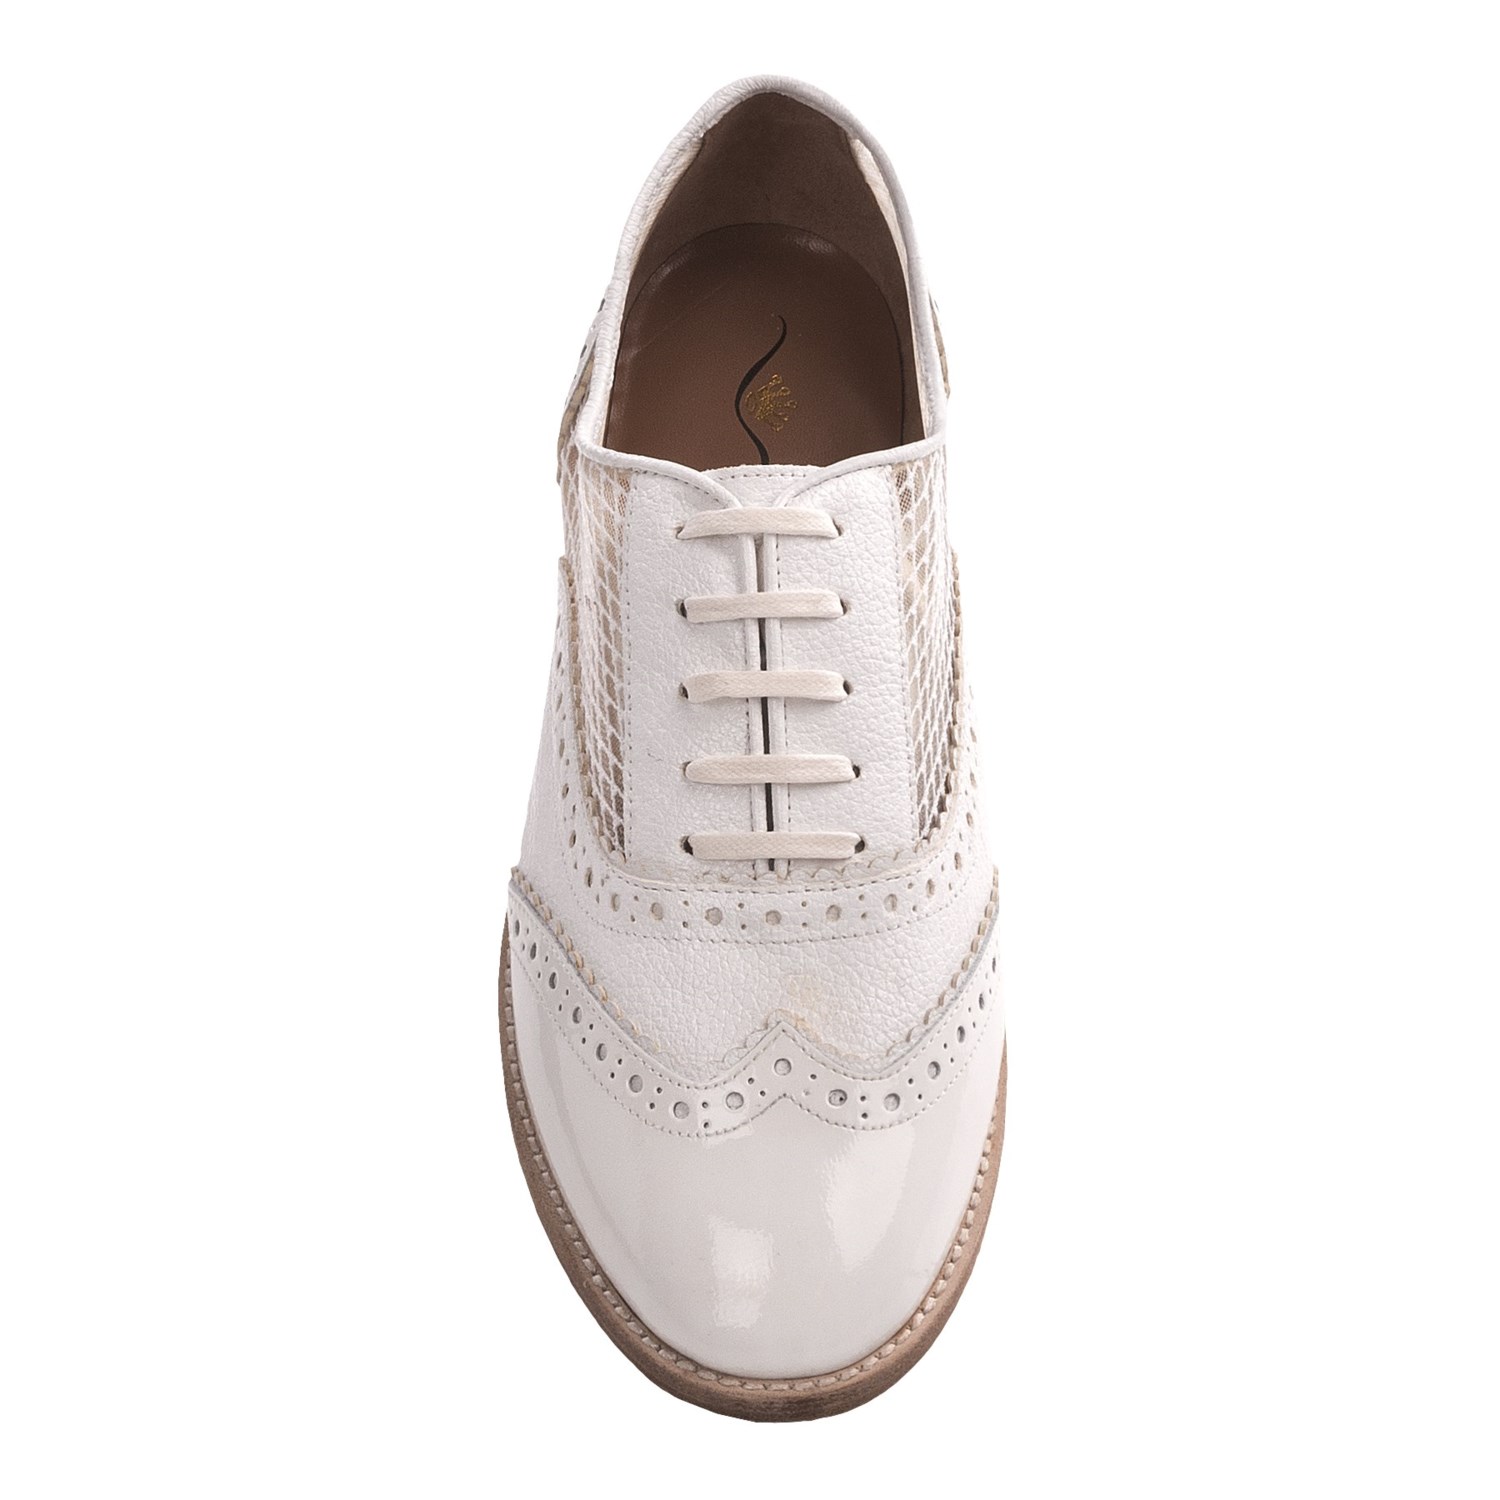 Nina Erma Oxford Shoes (For Women) - Save 93%